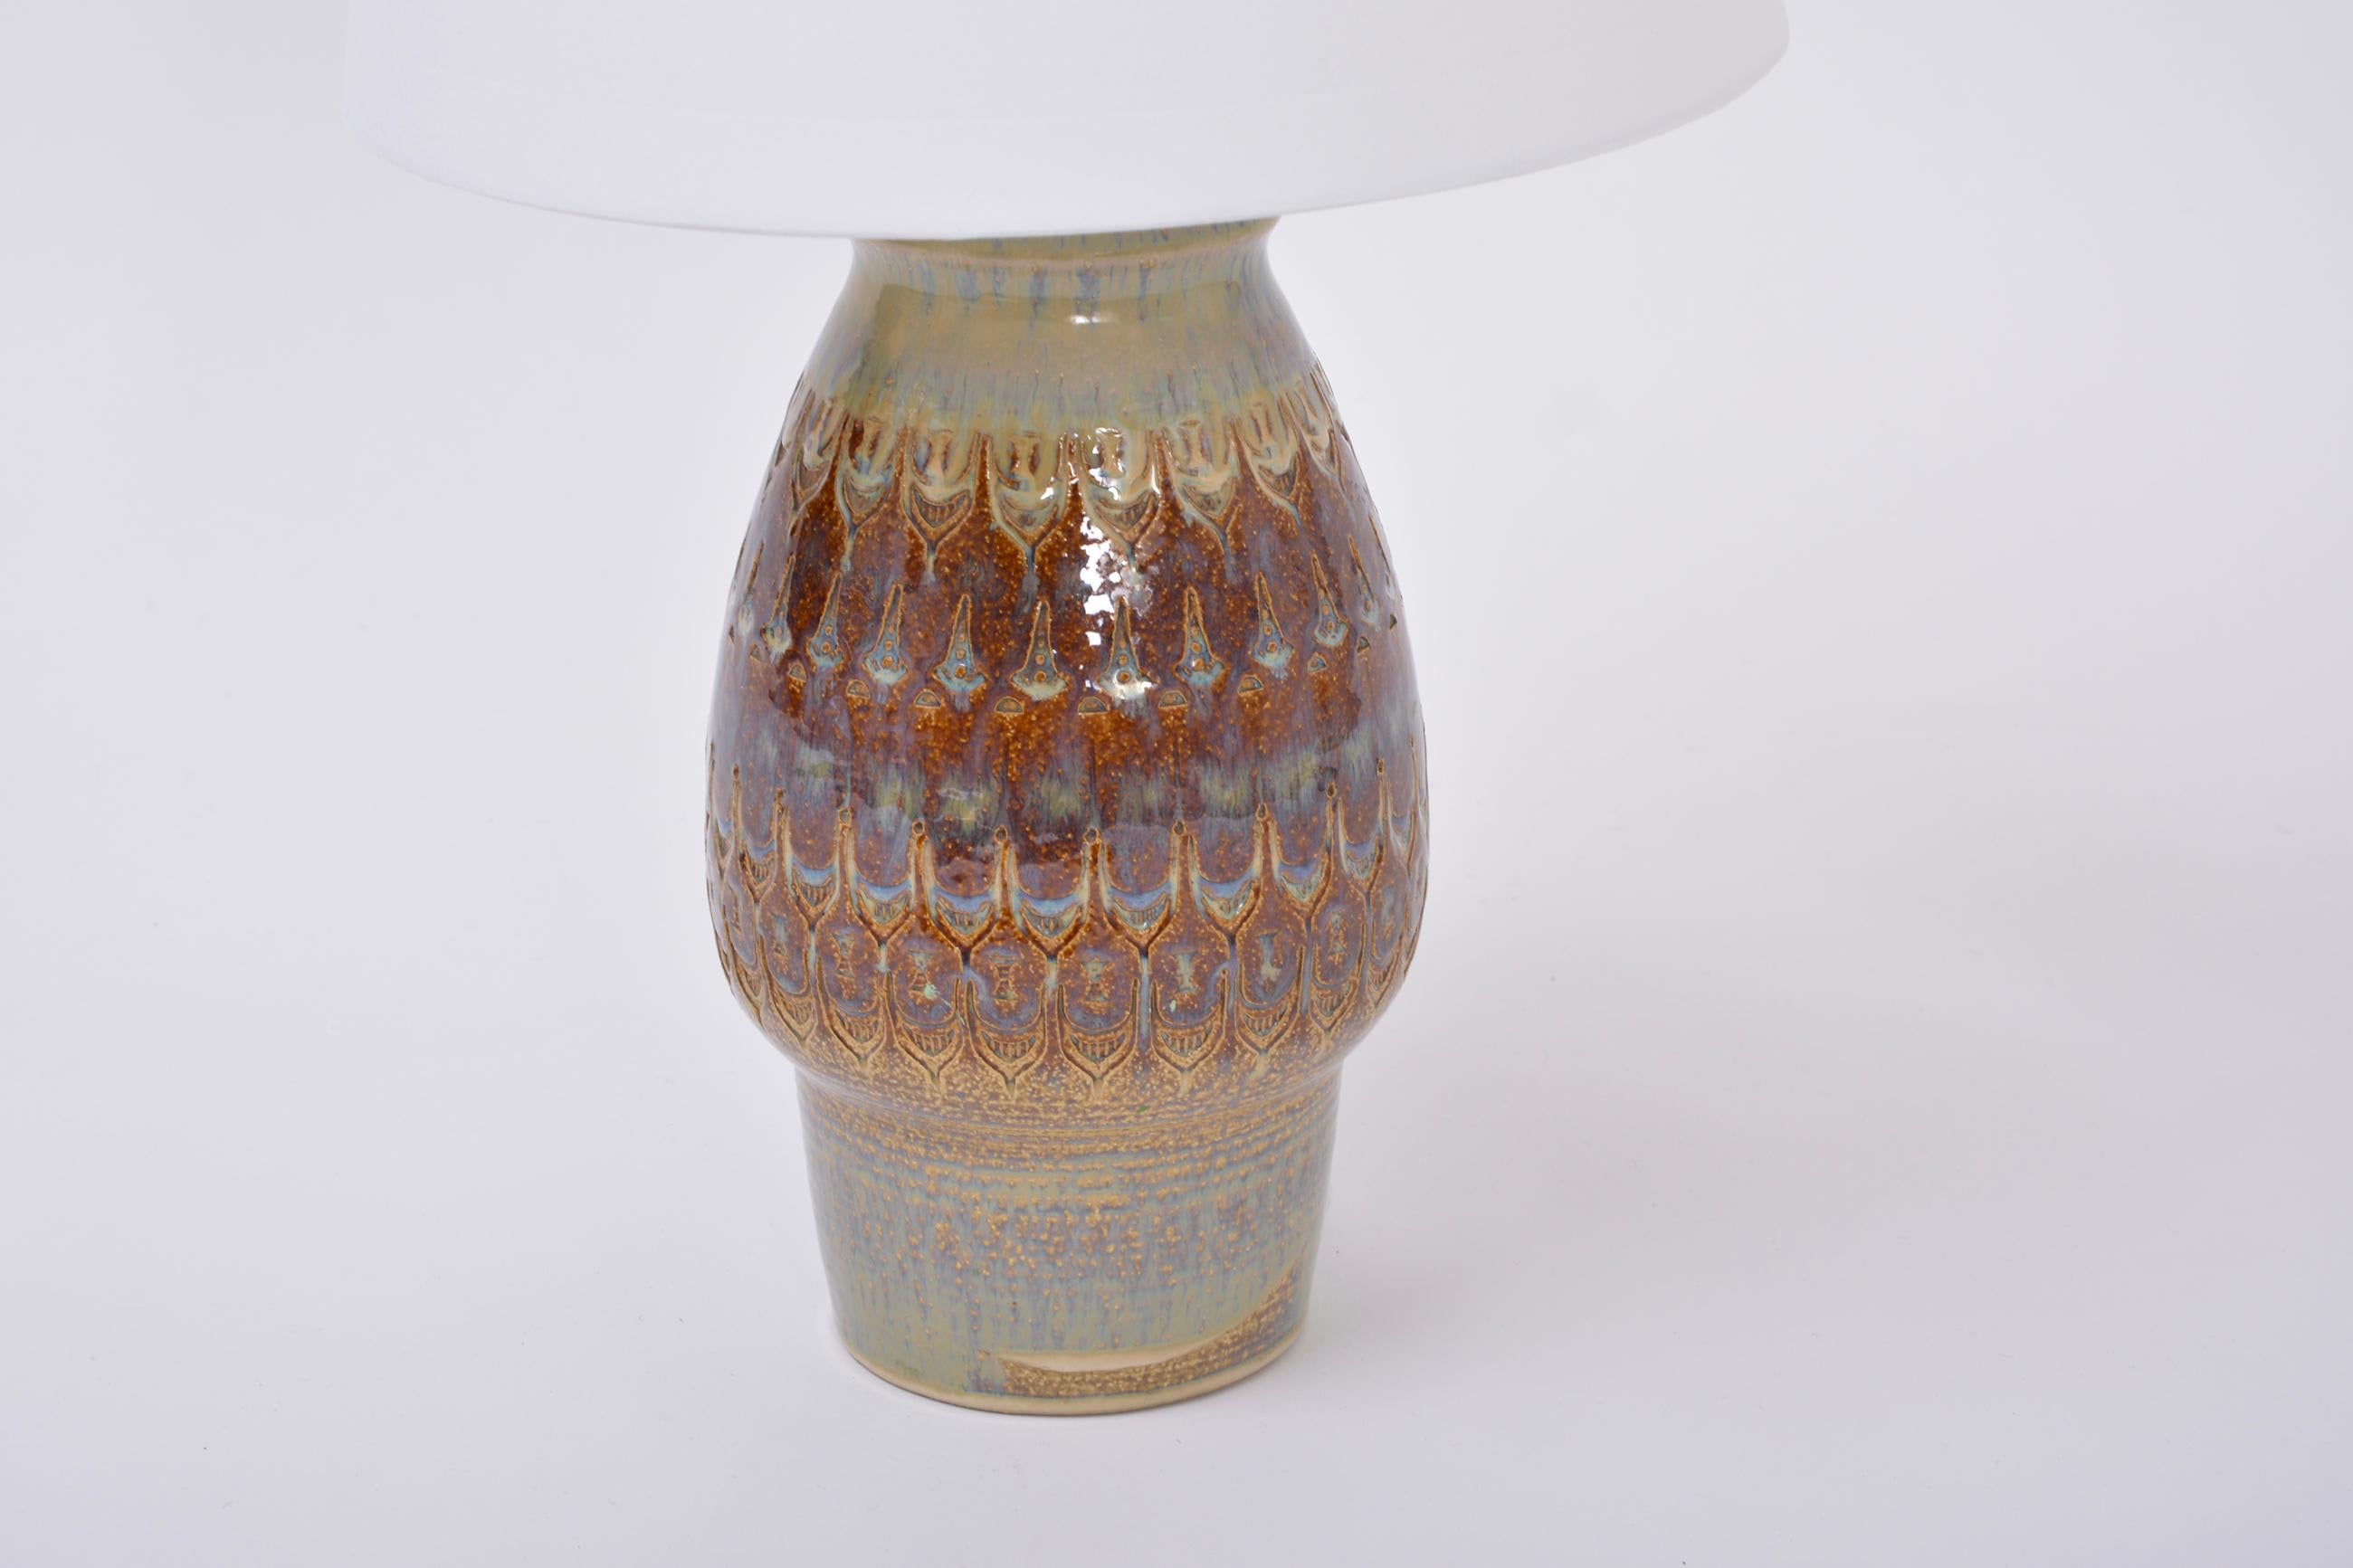 Brown Handmade Mid-Century Modern Danish Stoneware Table Lamp by Soholm Stentoj In Good Condition For Sale In Berlin, DE